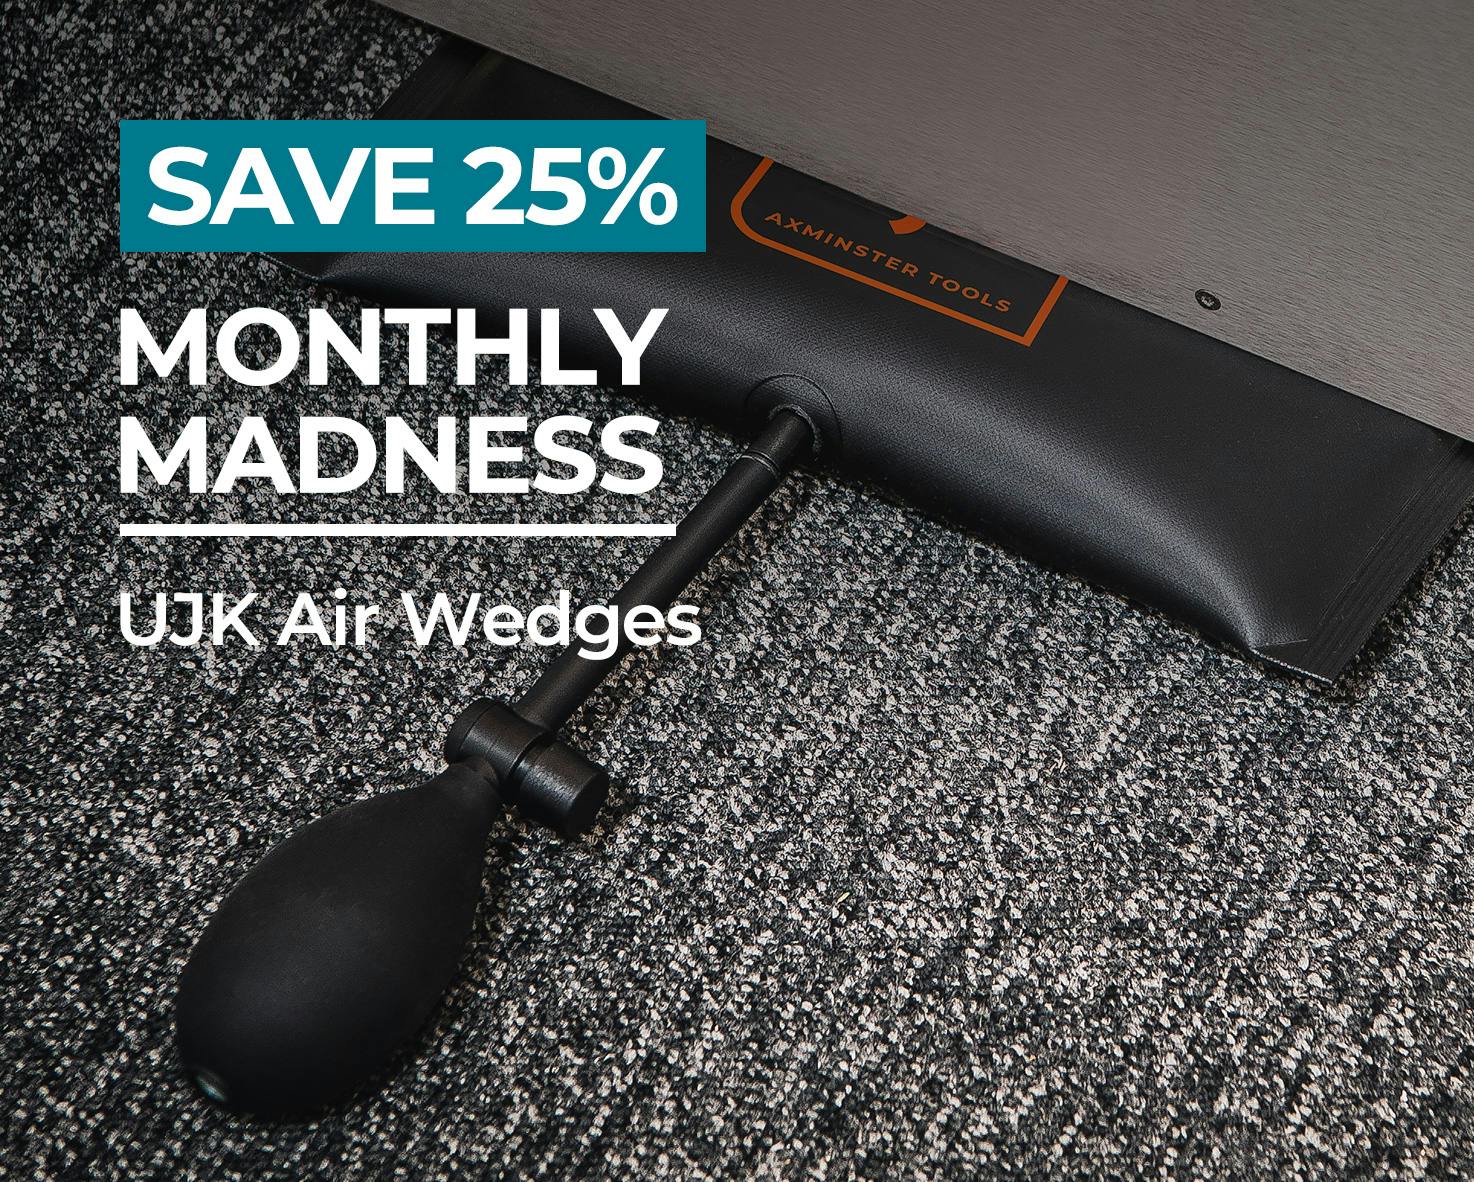 SAVE 25% Monthly Madness!